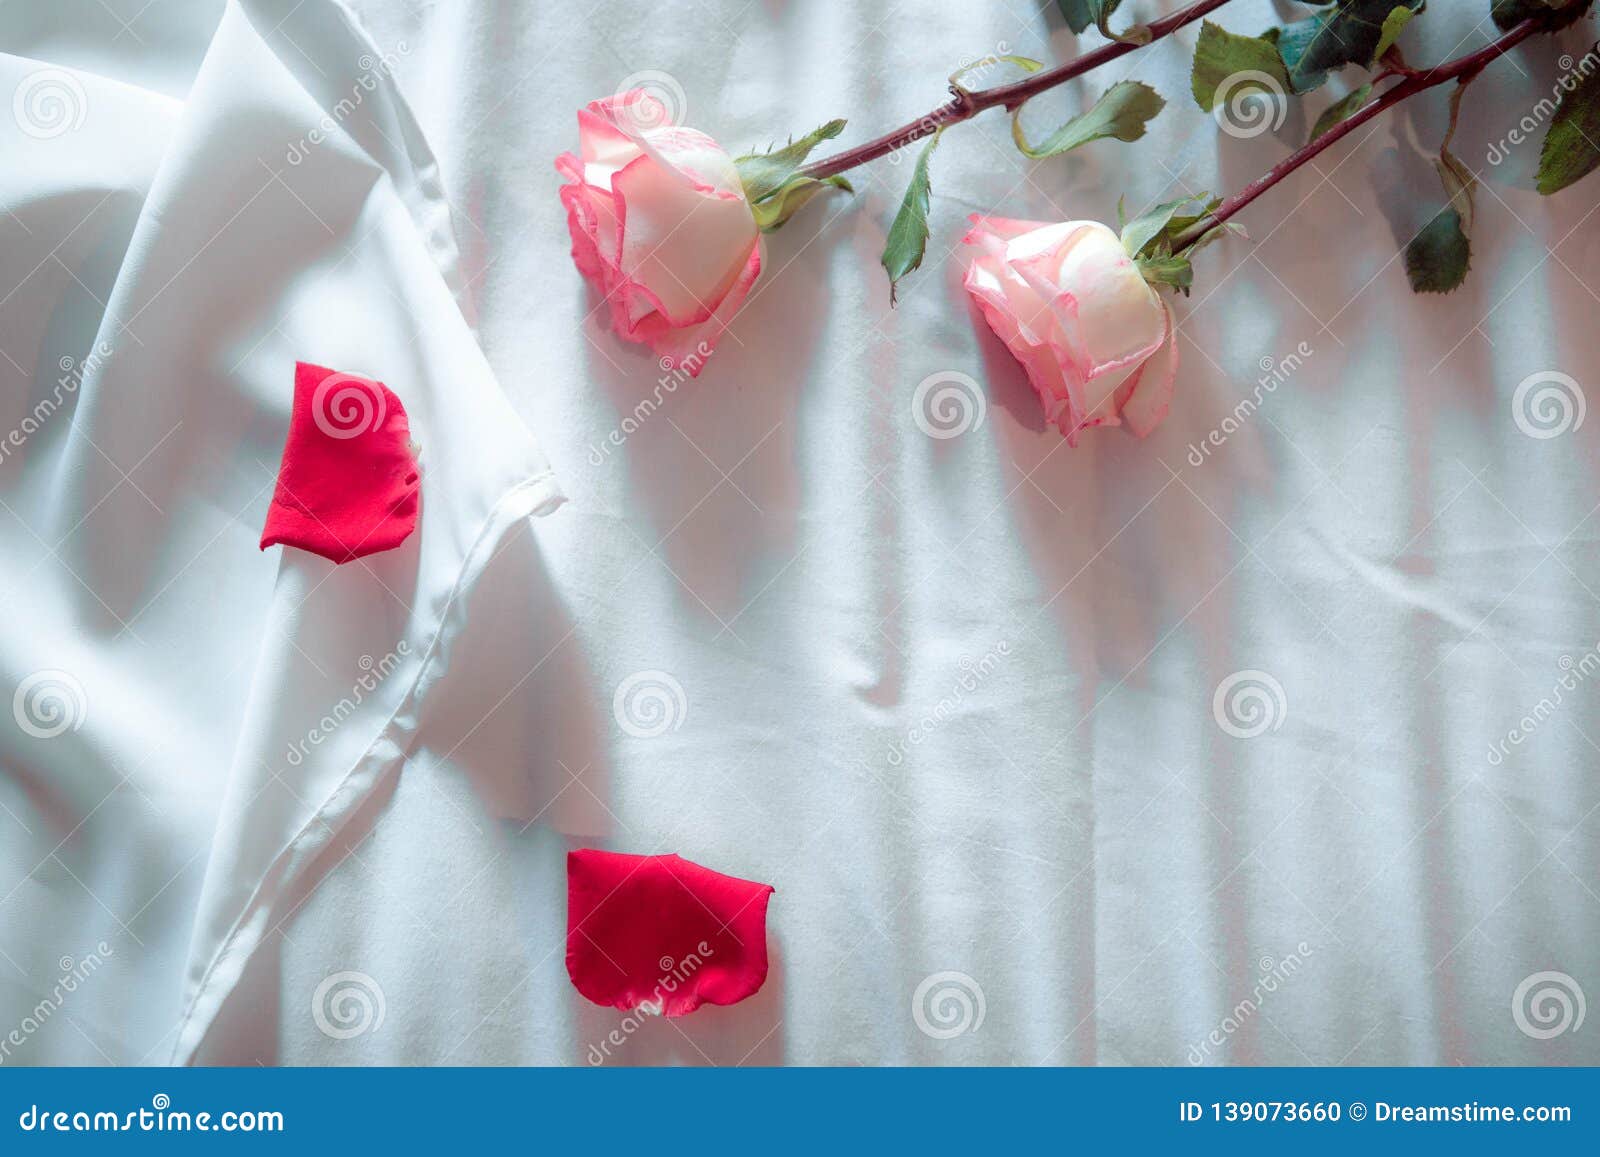 Pink rose on white Bed stock photo. Image of married - 139073660